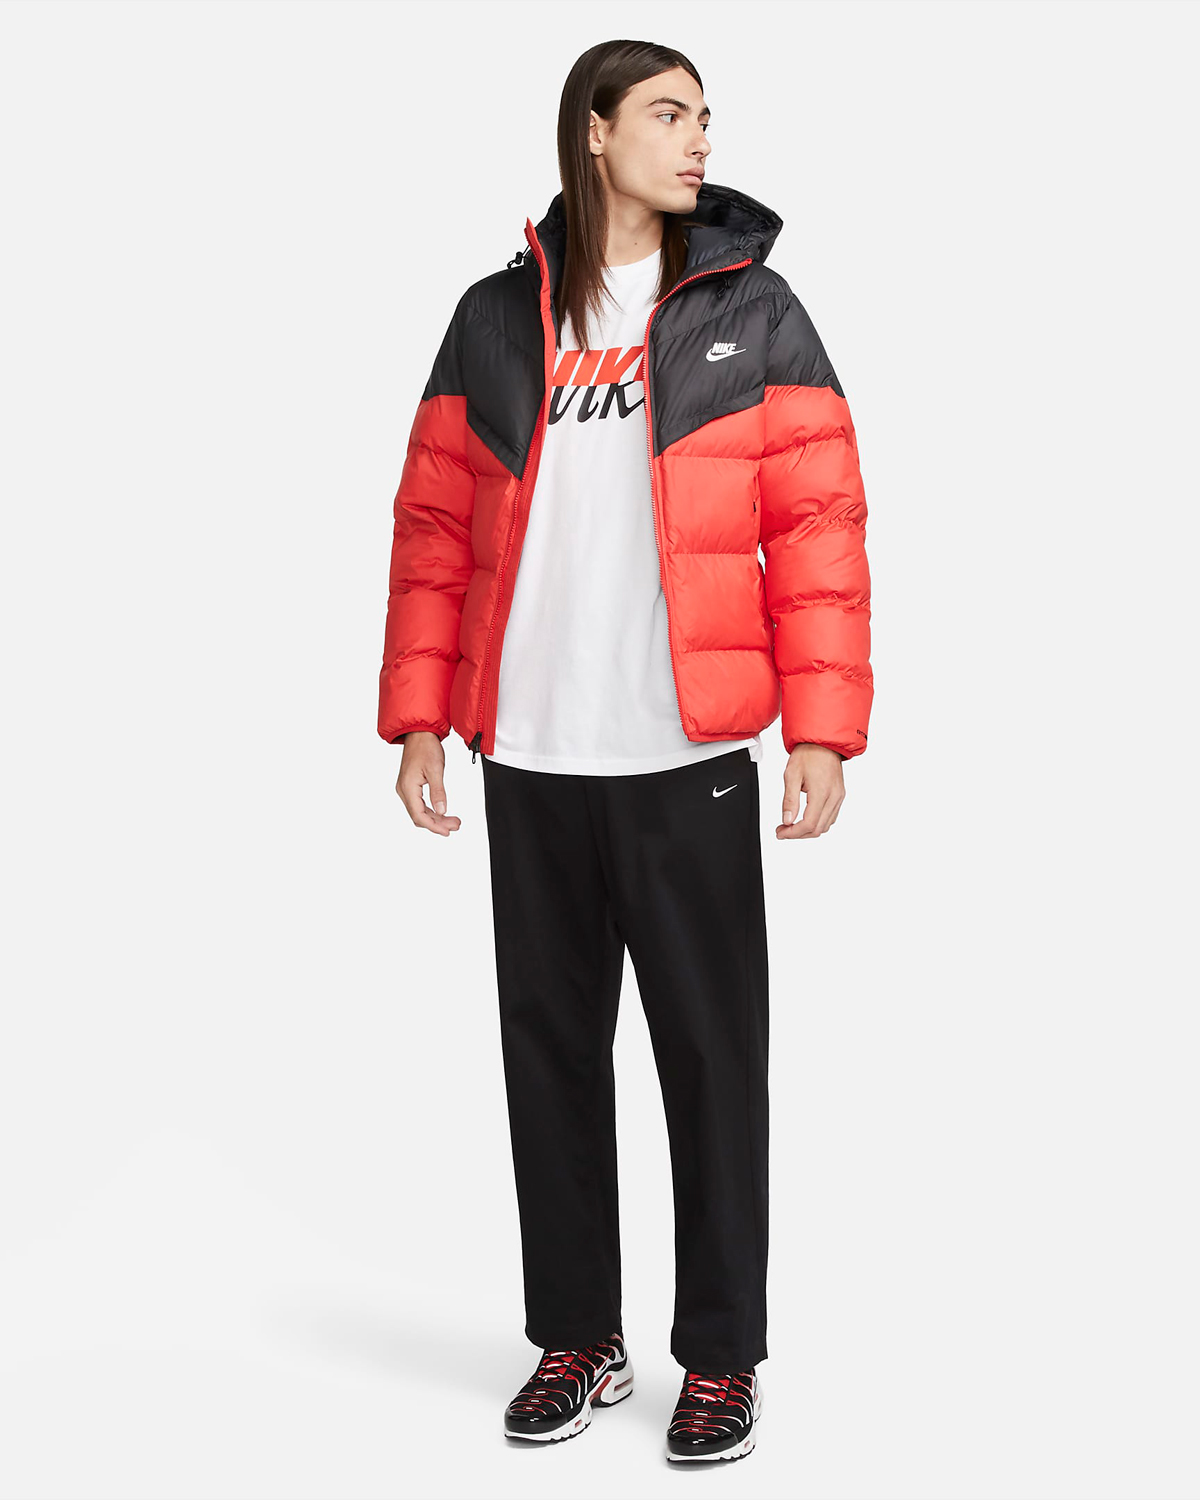 Nike-Windrunner-Hooded-Puffer-Jacket-University-Red-Black-Outfit